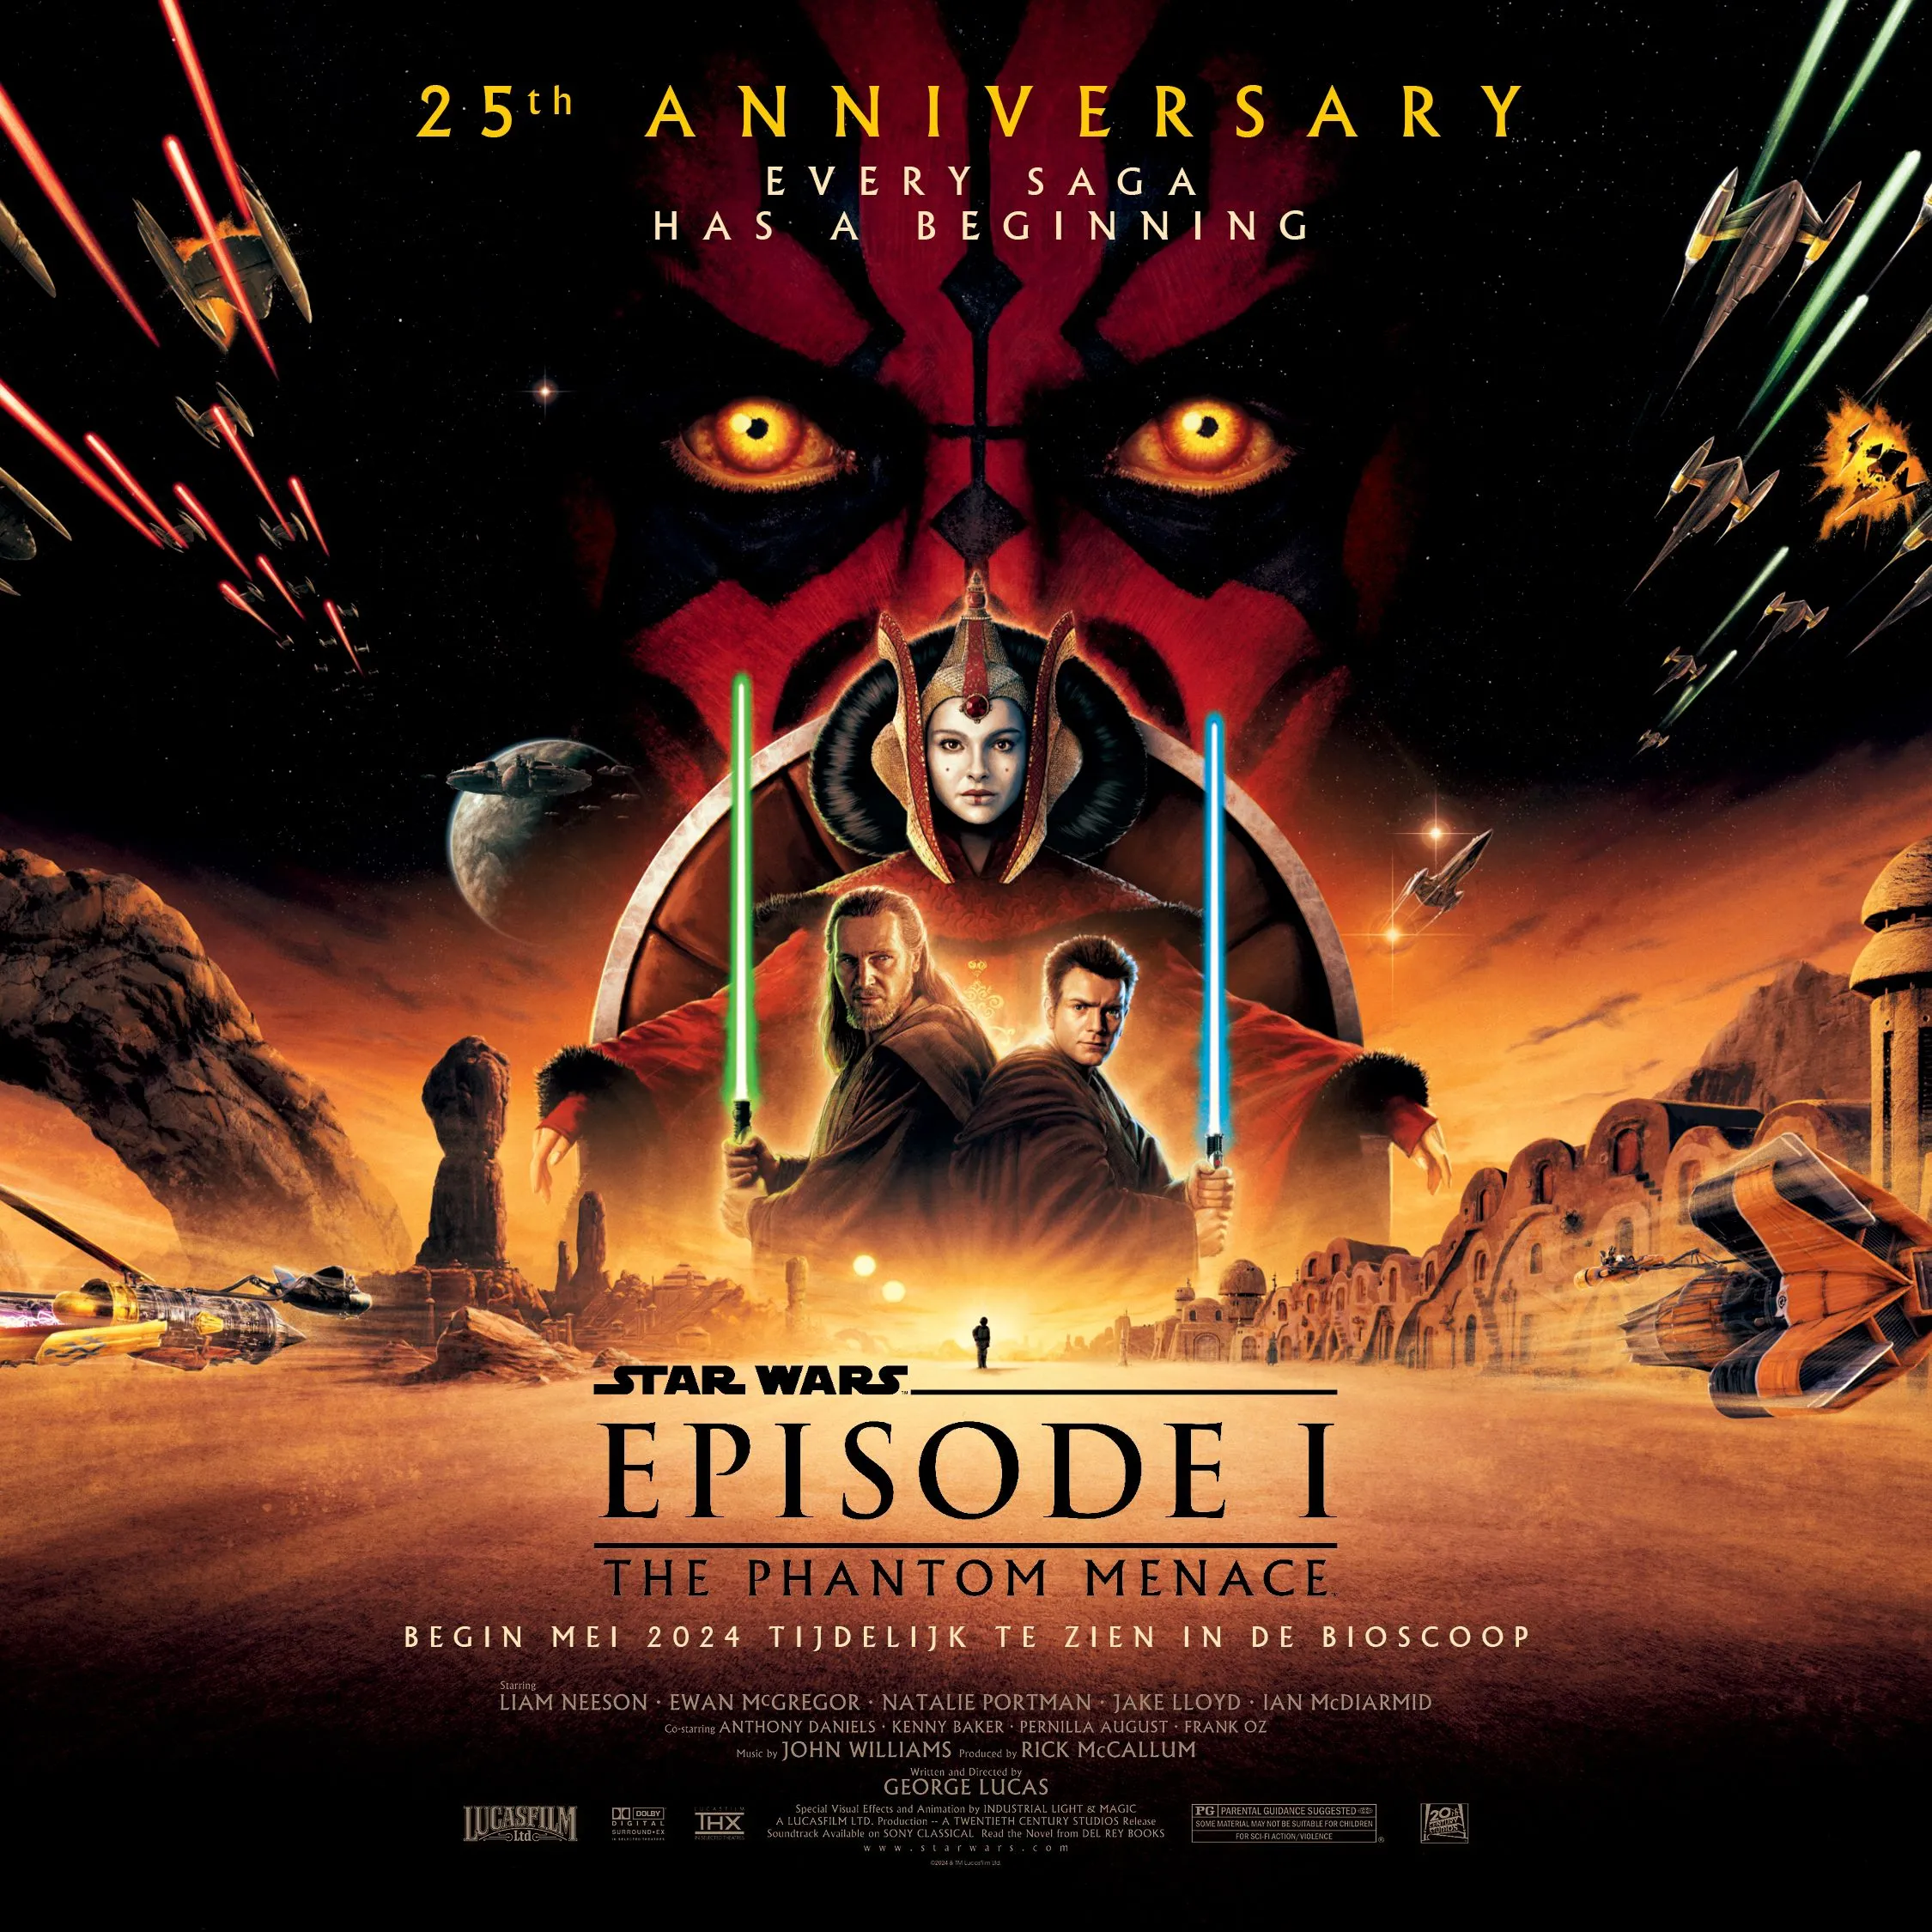 Star Wars Episode I: The Phantom Menace - © The Walt Disney Company Benelux All Rights Reserved